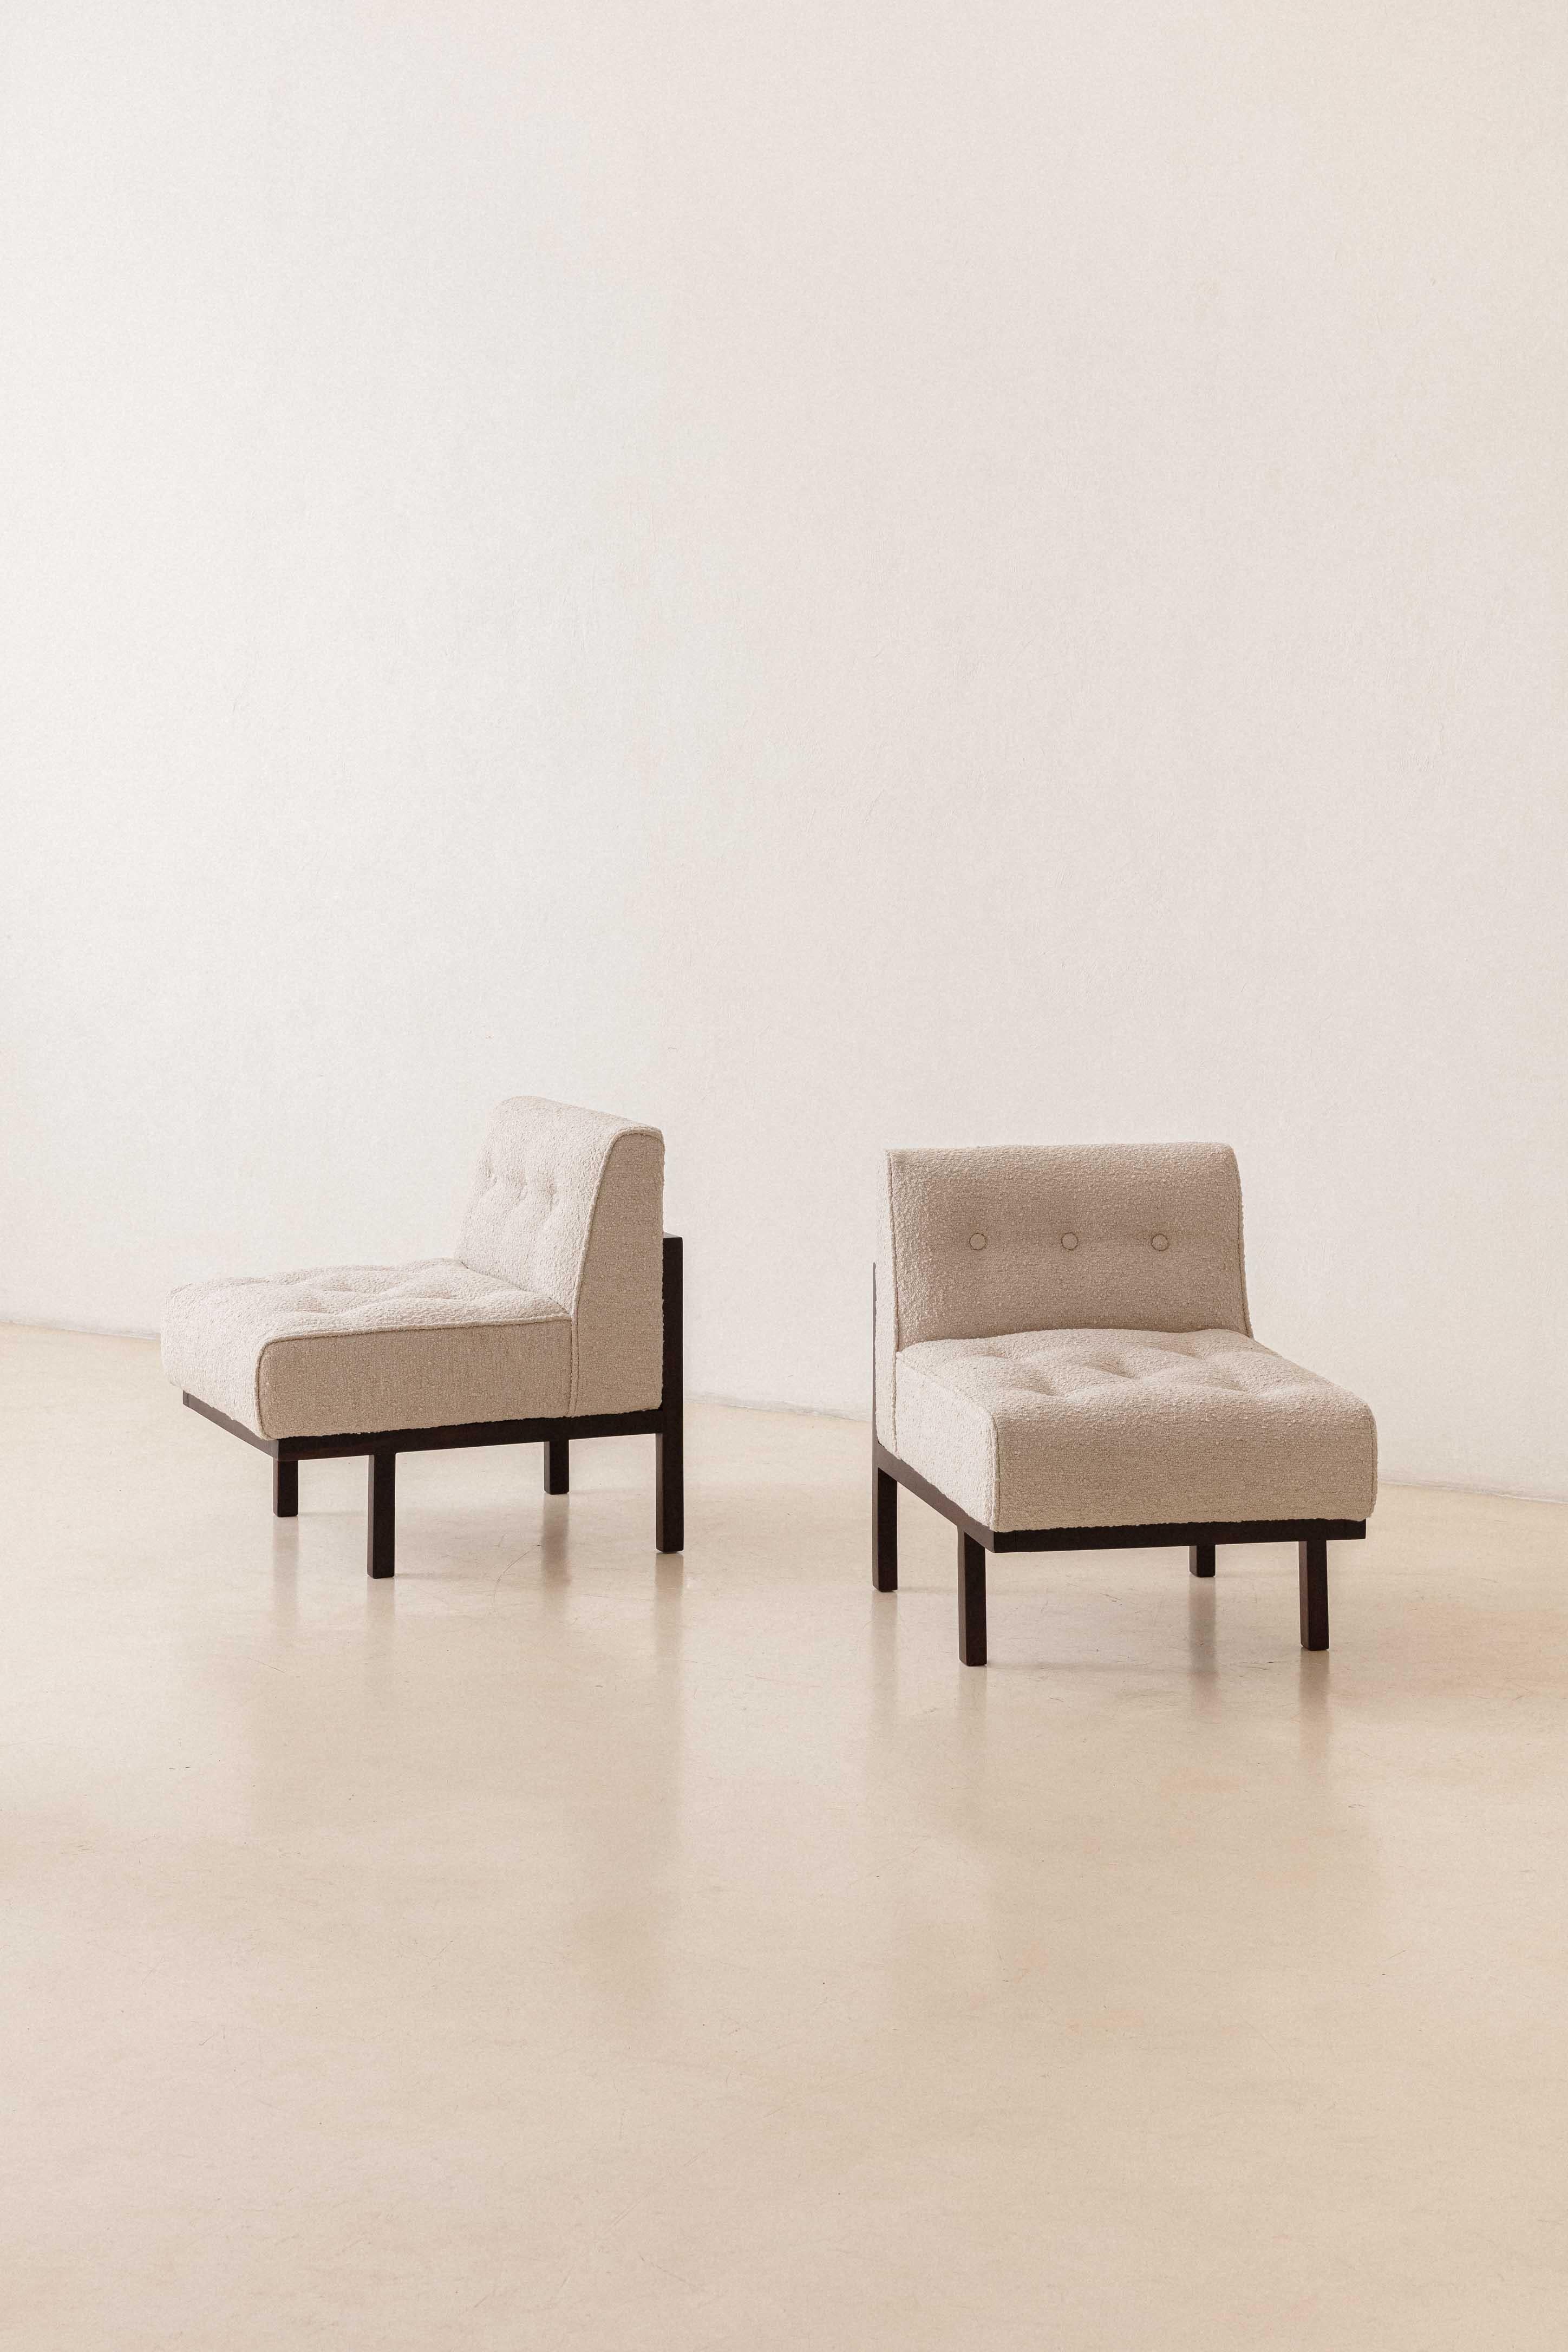 Pair of M1 Armchairs by Brazilian Company Branco & Preto, Midcentury, 1952 In Good Condition For Sale In New York, NY